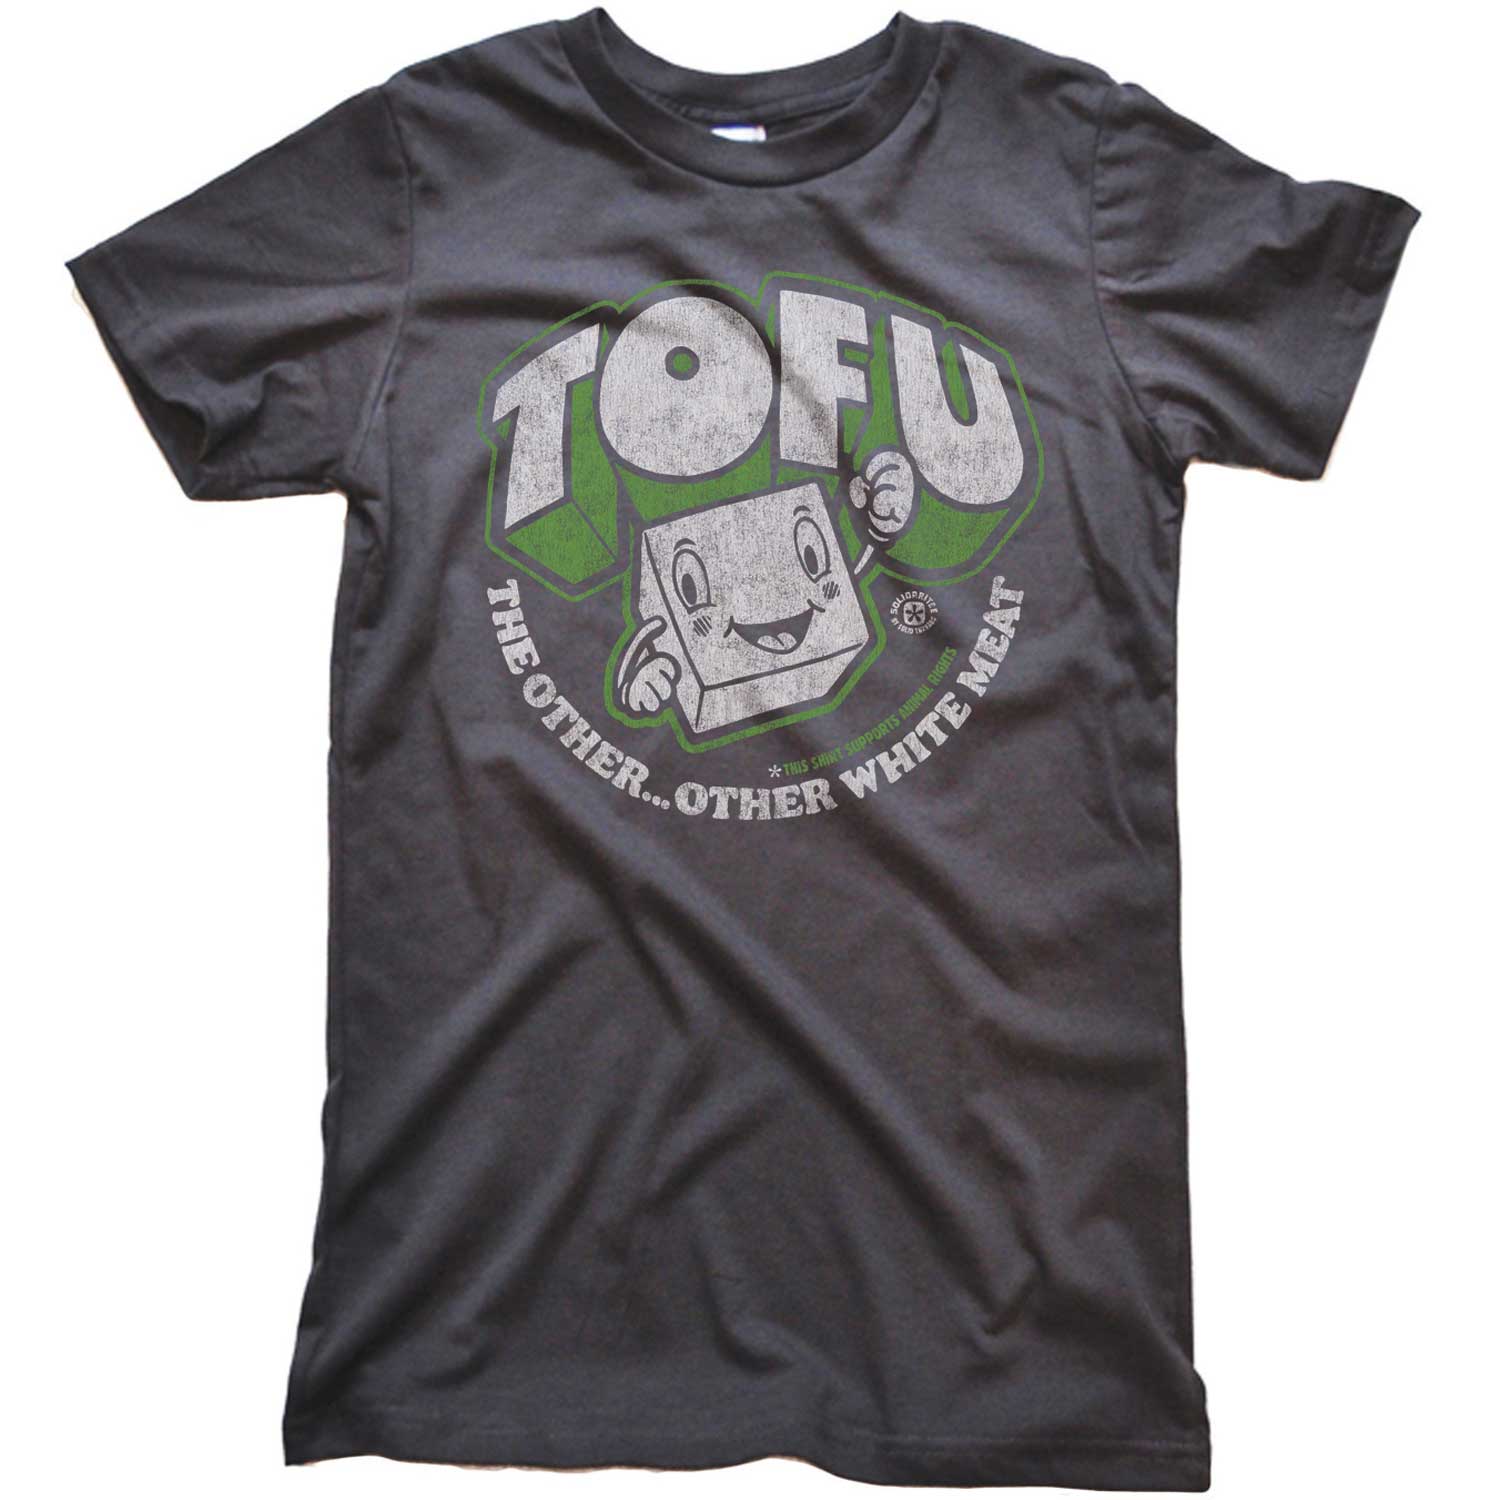 Women's Tofu, The Other White Meat Vintage Graphic Crop Top | Retro Vegan T-shirt | Solid Threads